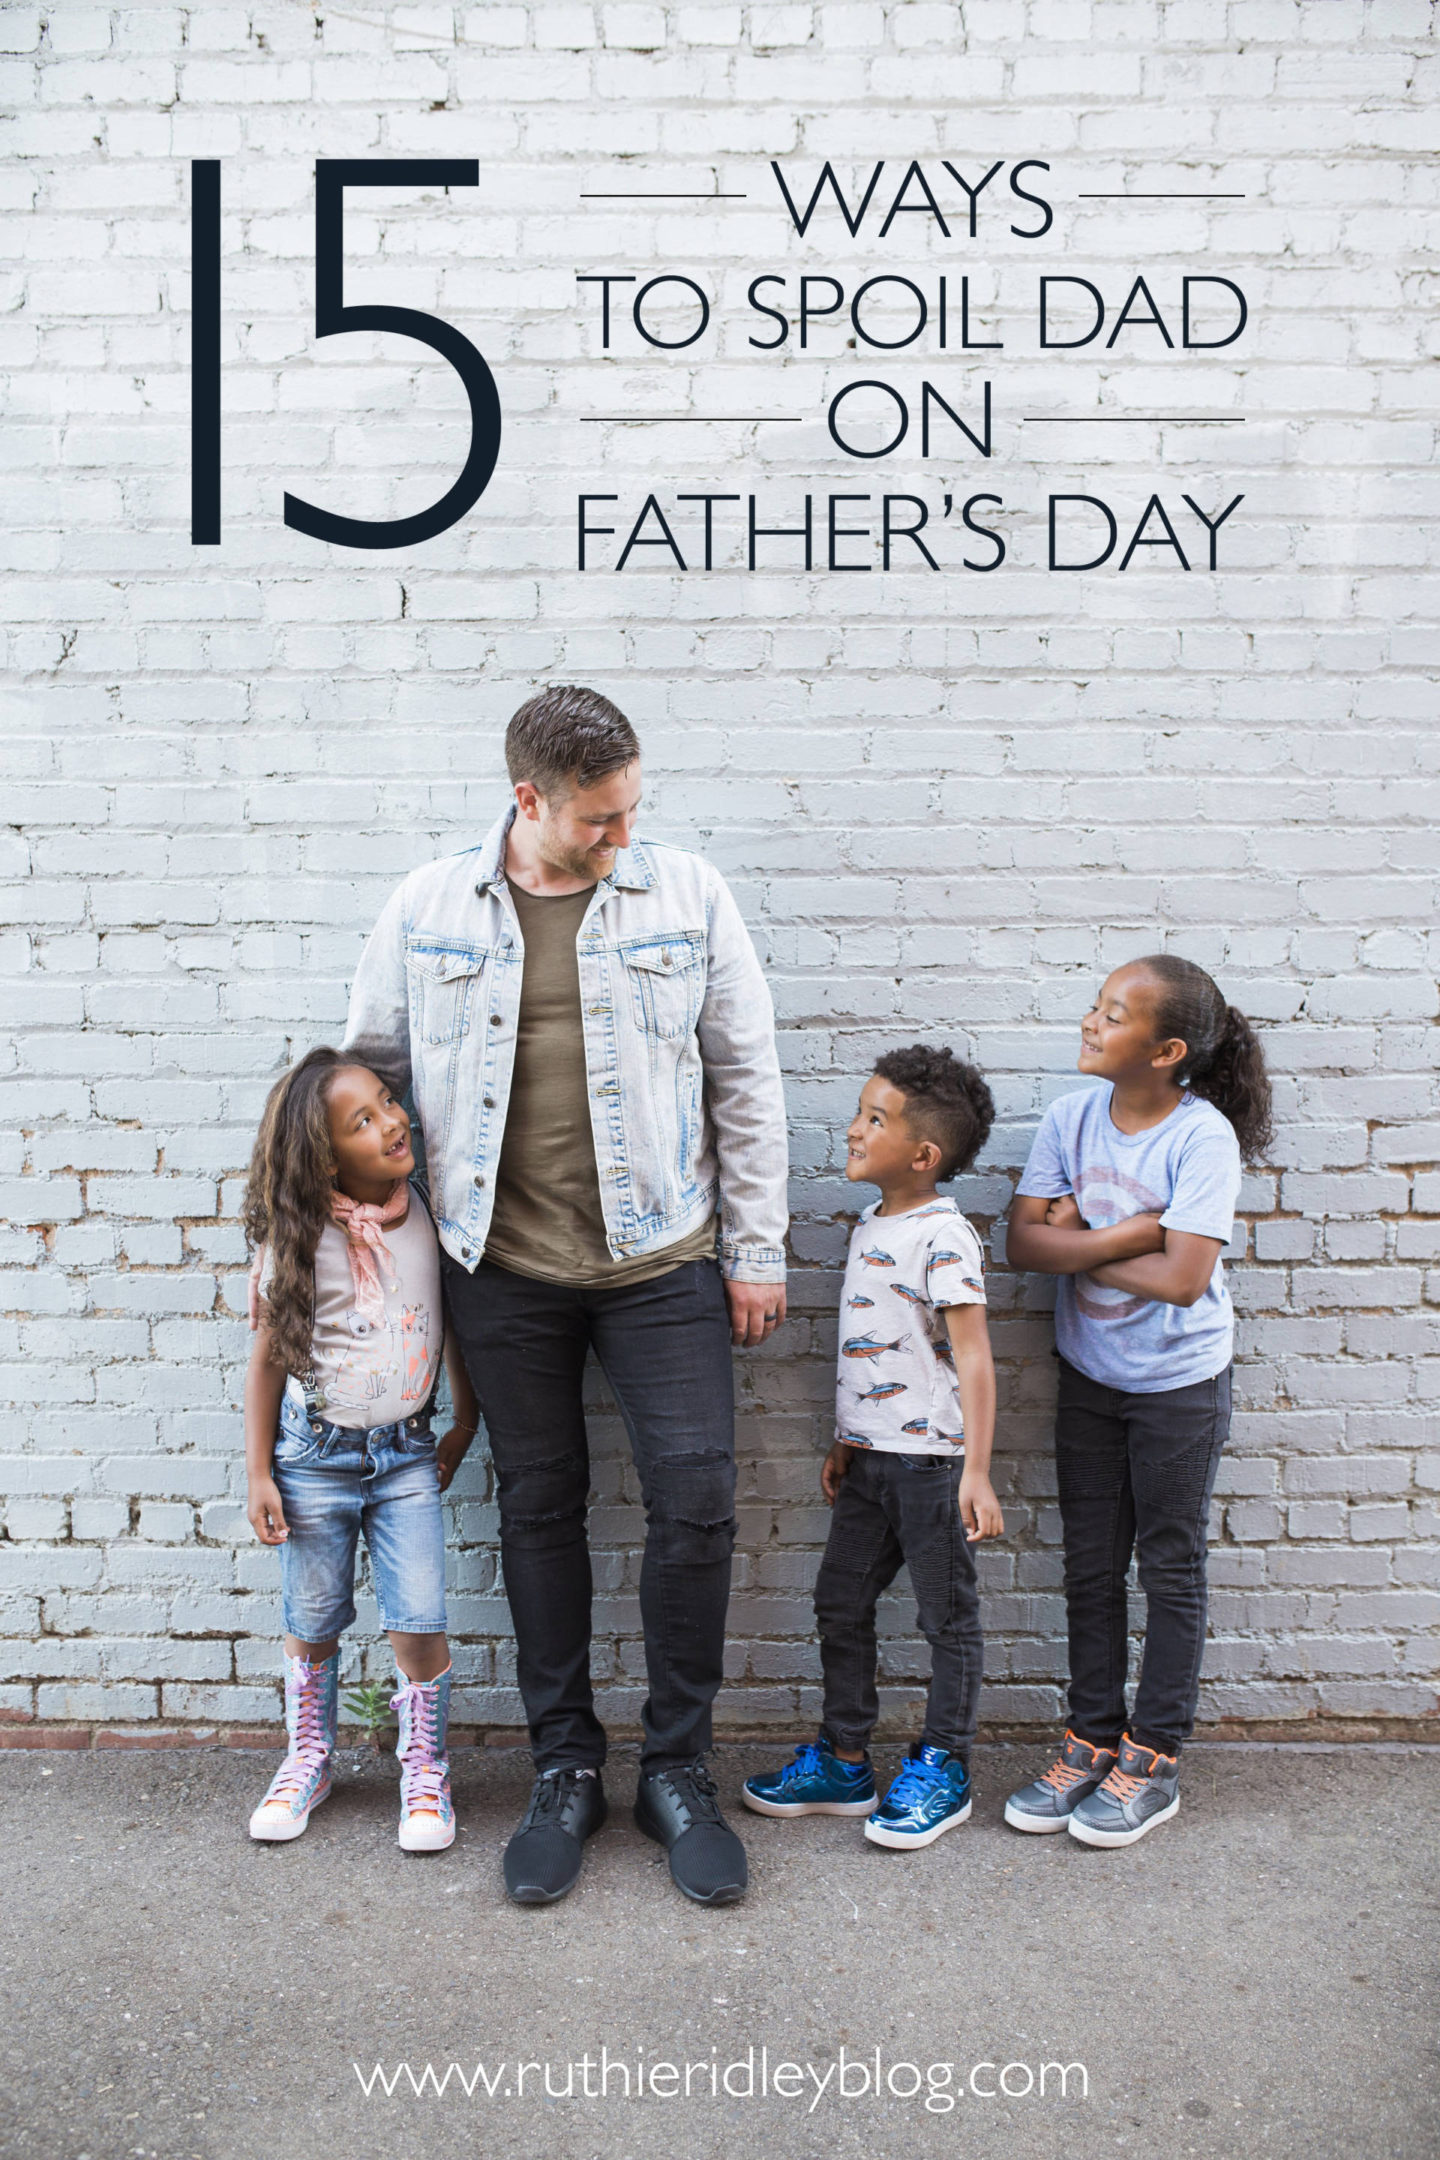 How do you spoil your dad on father's Day?